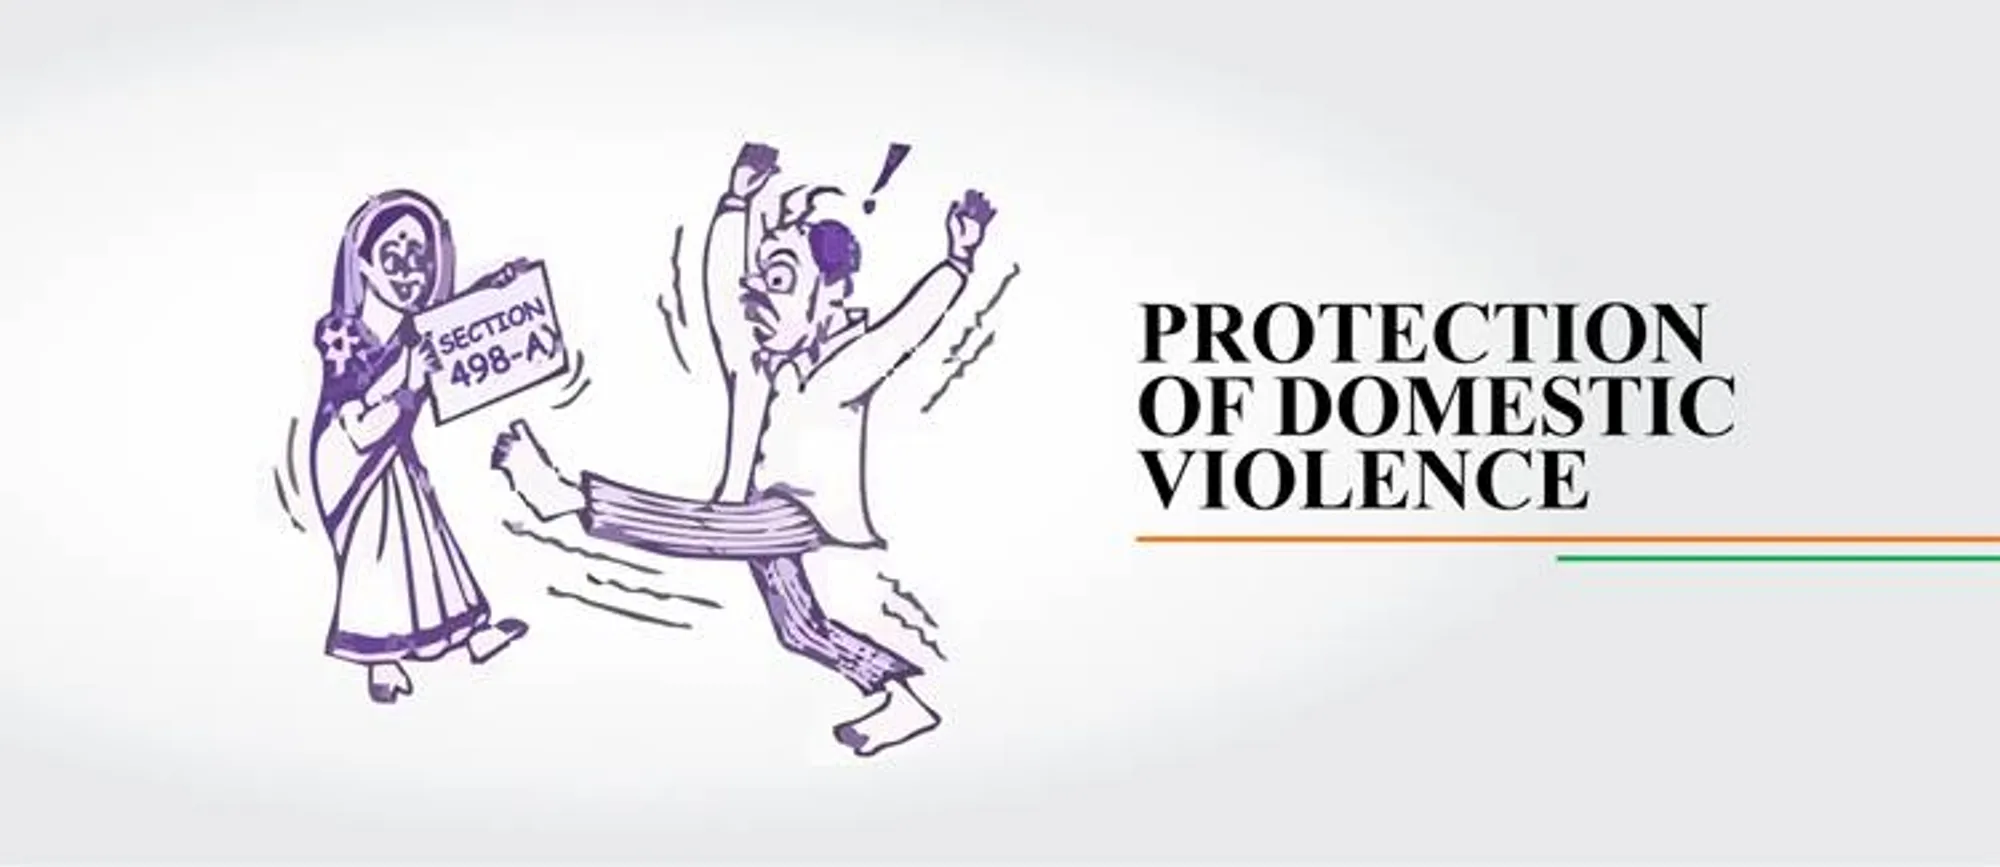 protection of domestic violence against women